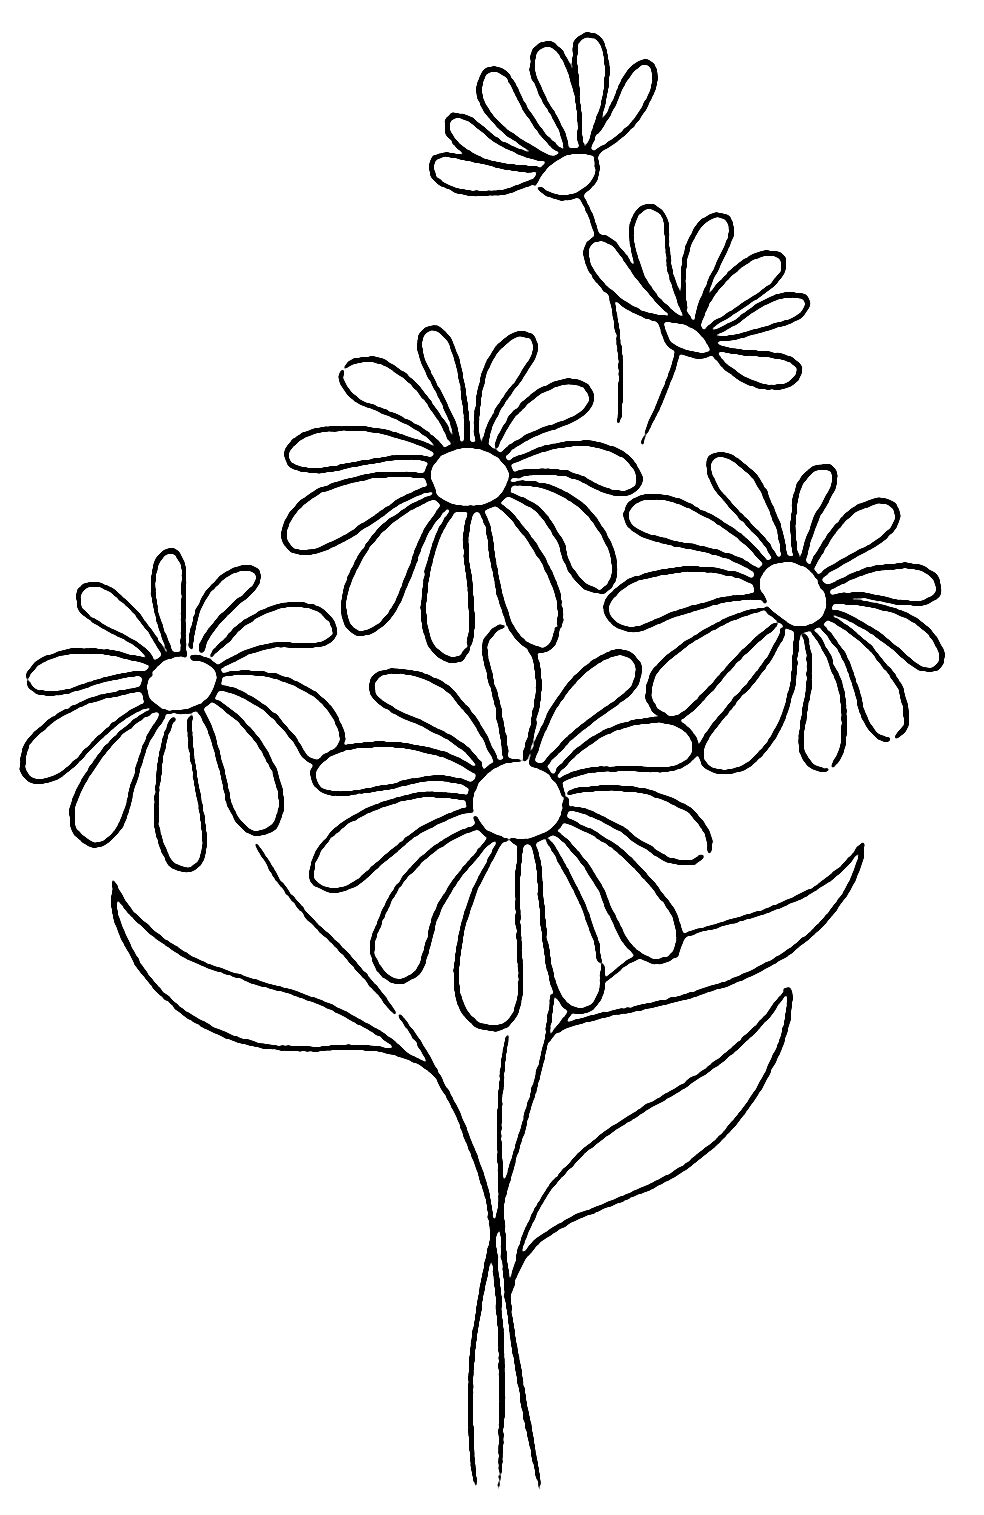 Pretty Flower Coloring Pages ~ Flower Coloring Pages - orecchiaisaisa